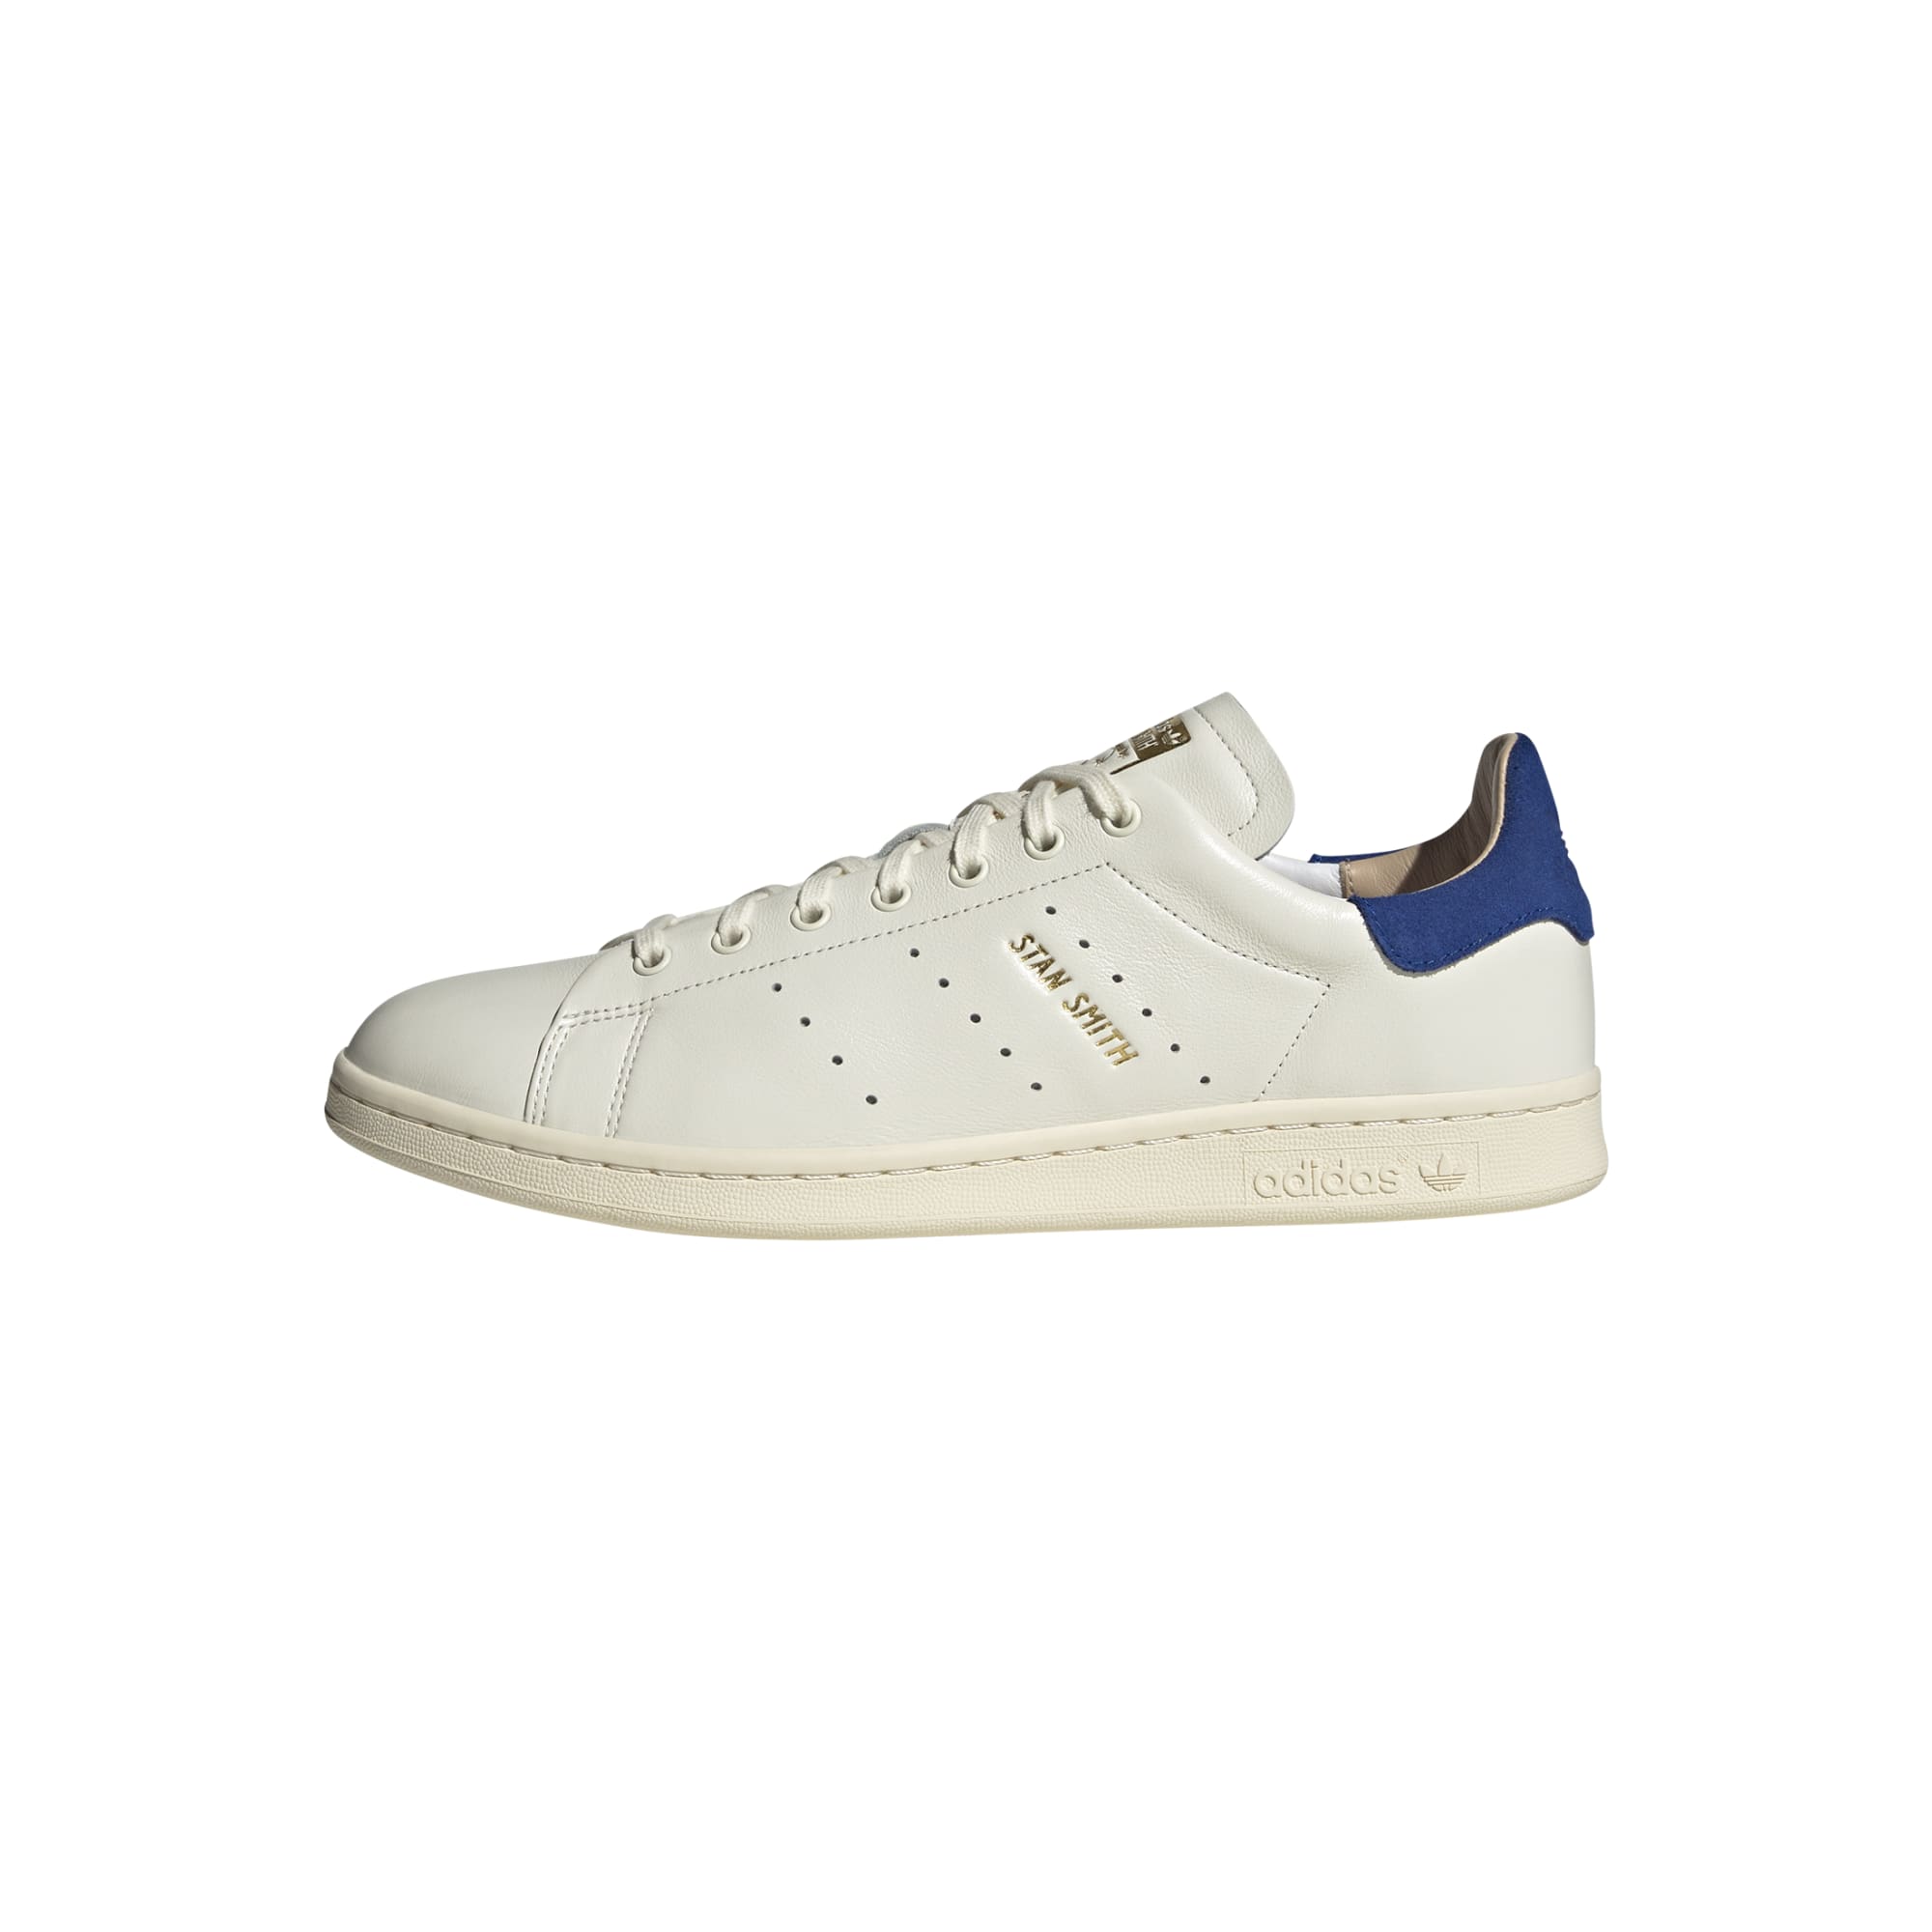 ADIDAS STAN SMITH LUX ID1995 SNEAKER (M)-11